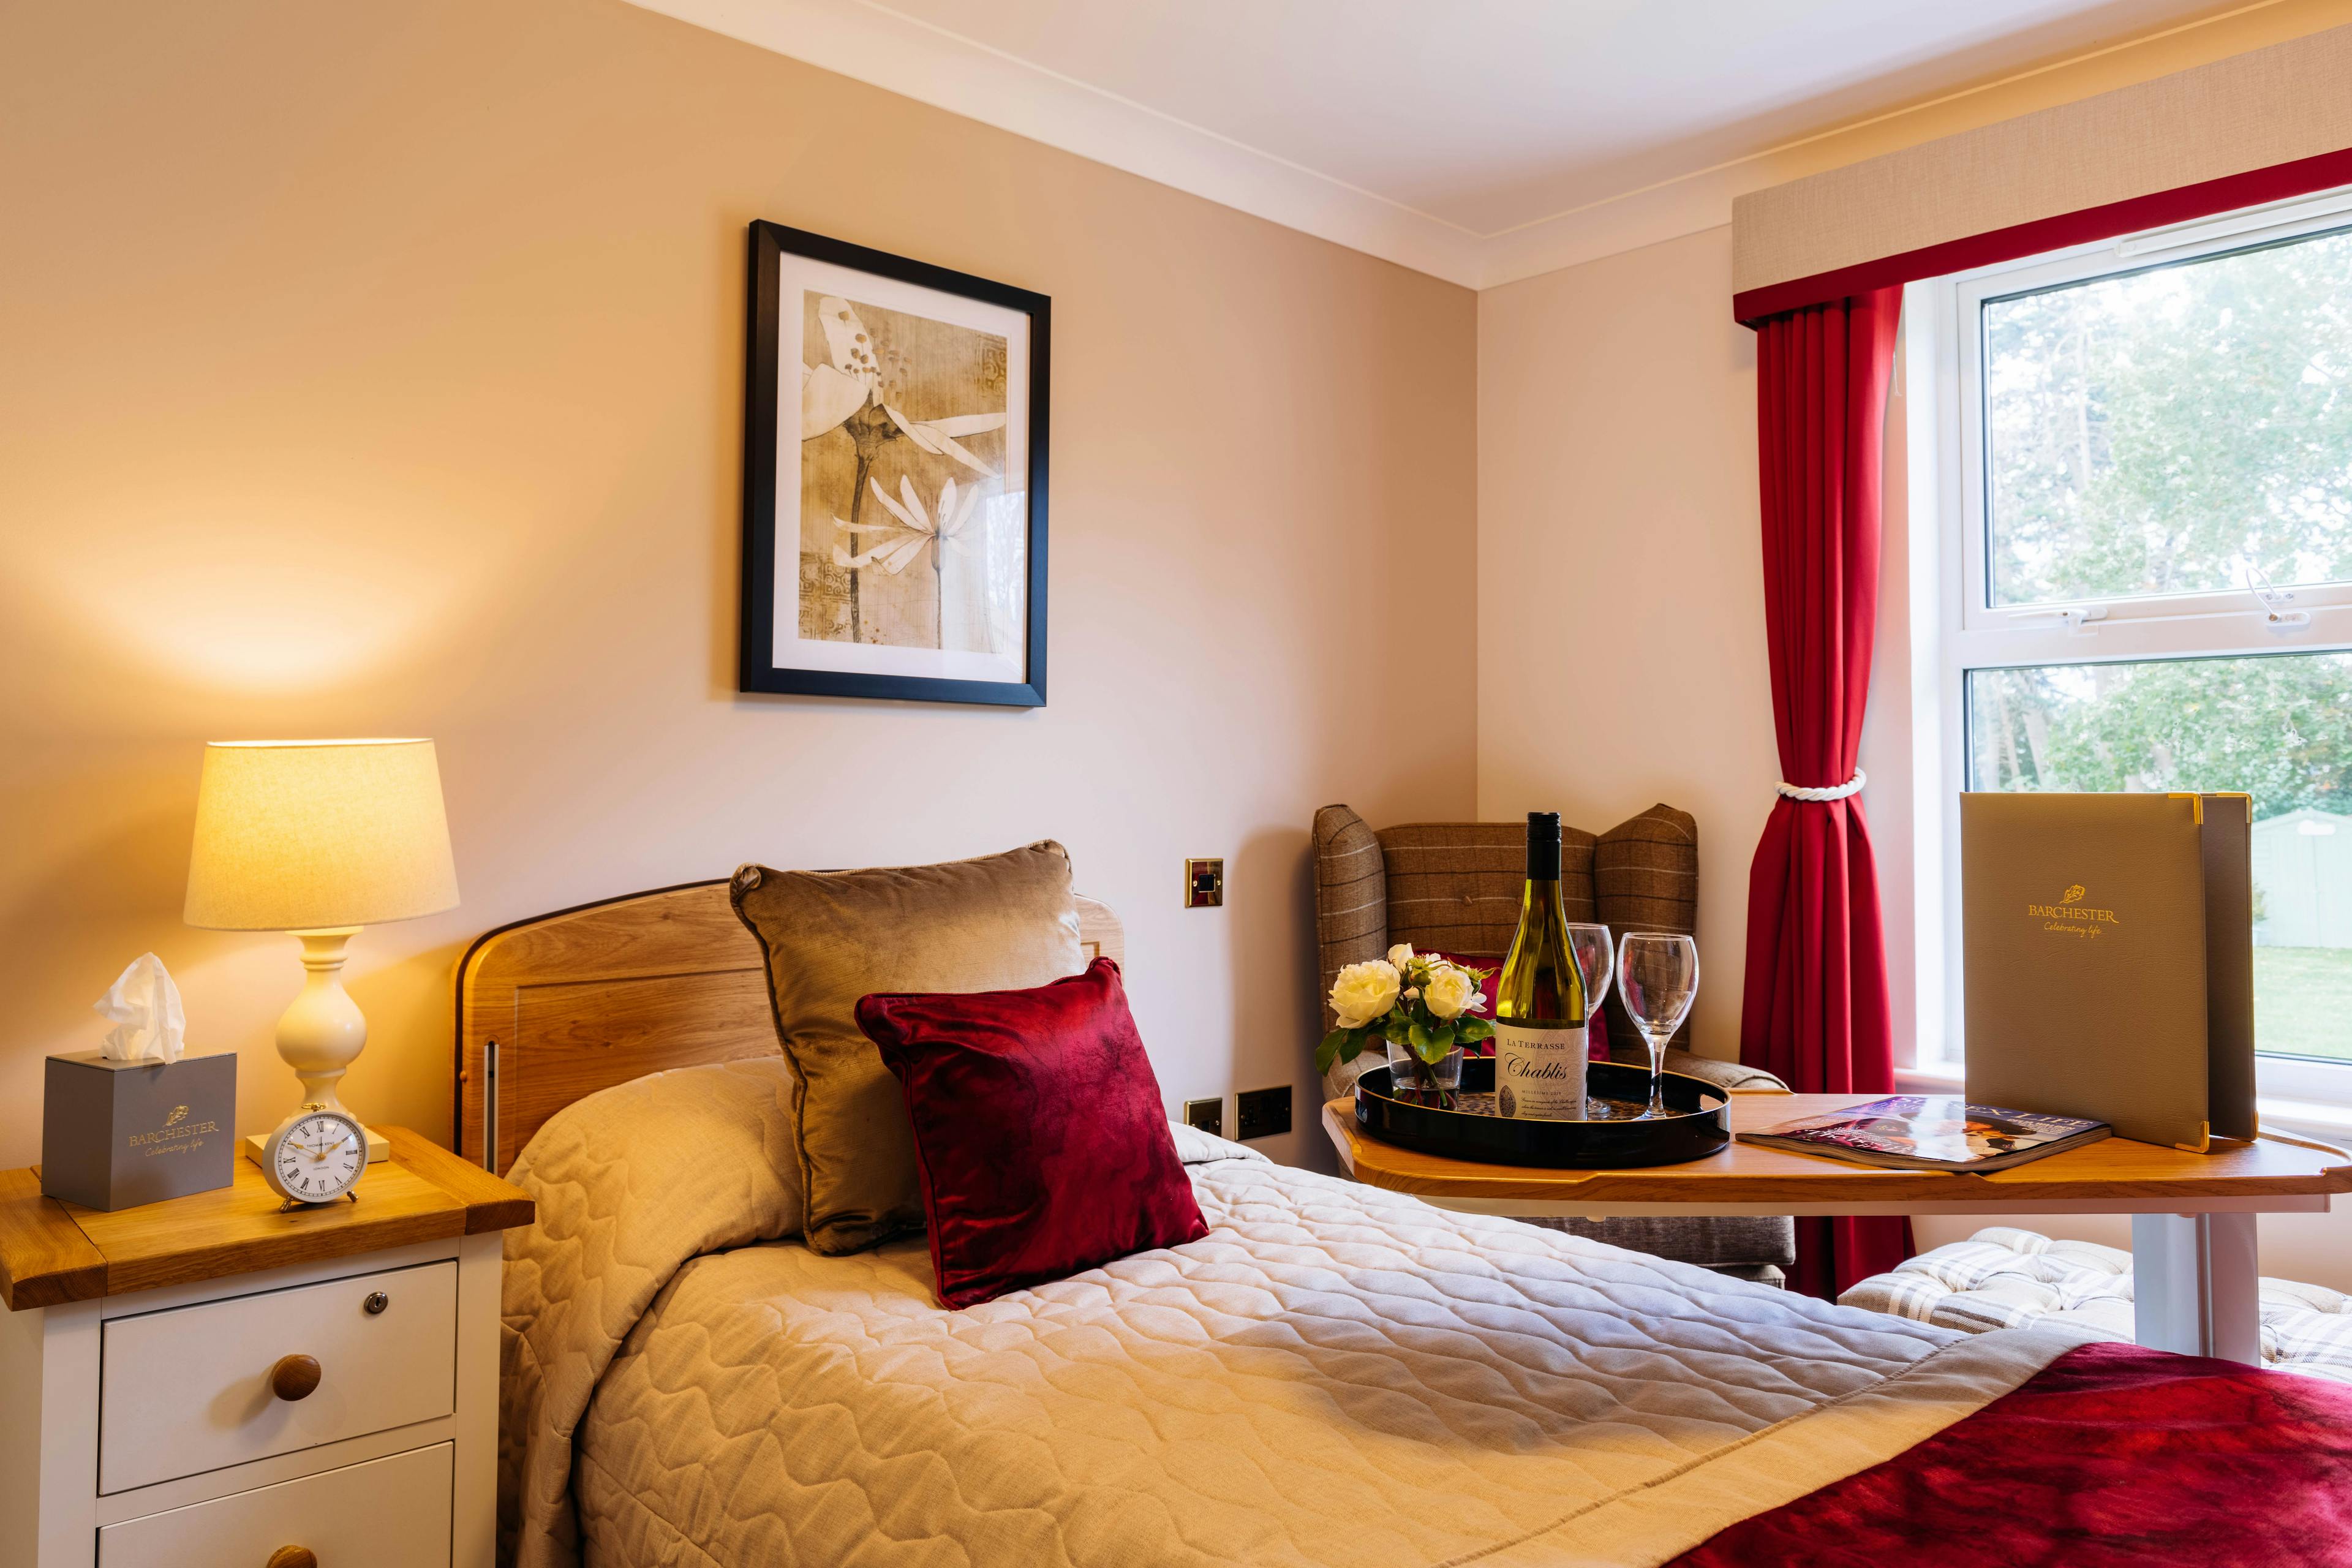 Bedroom at Lydfords Care Home in Lewes, East Sussex